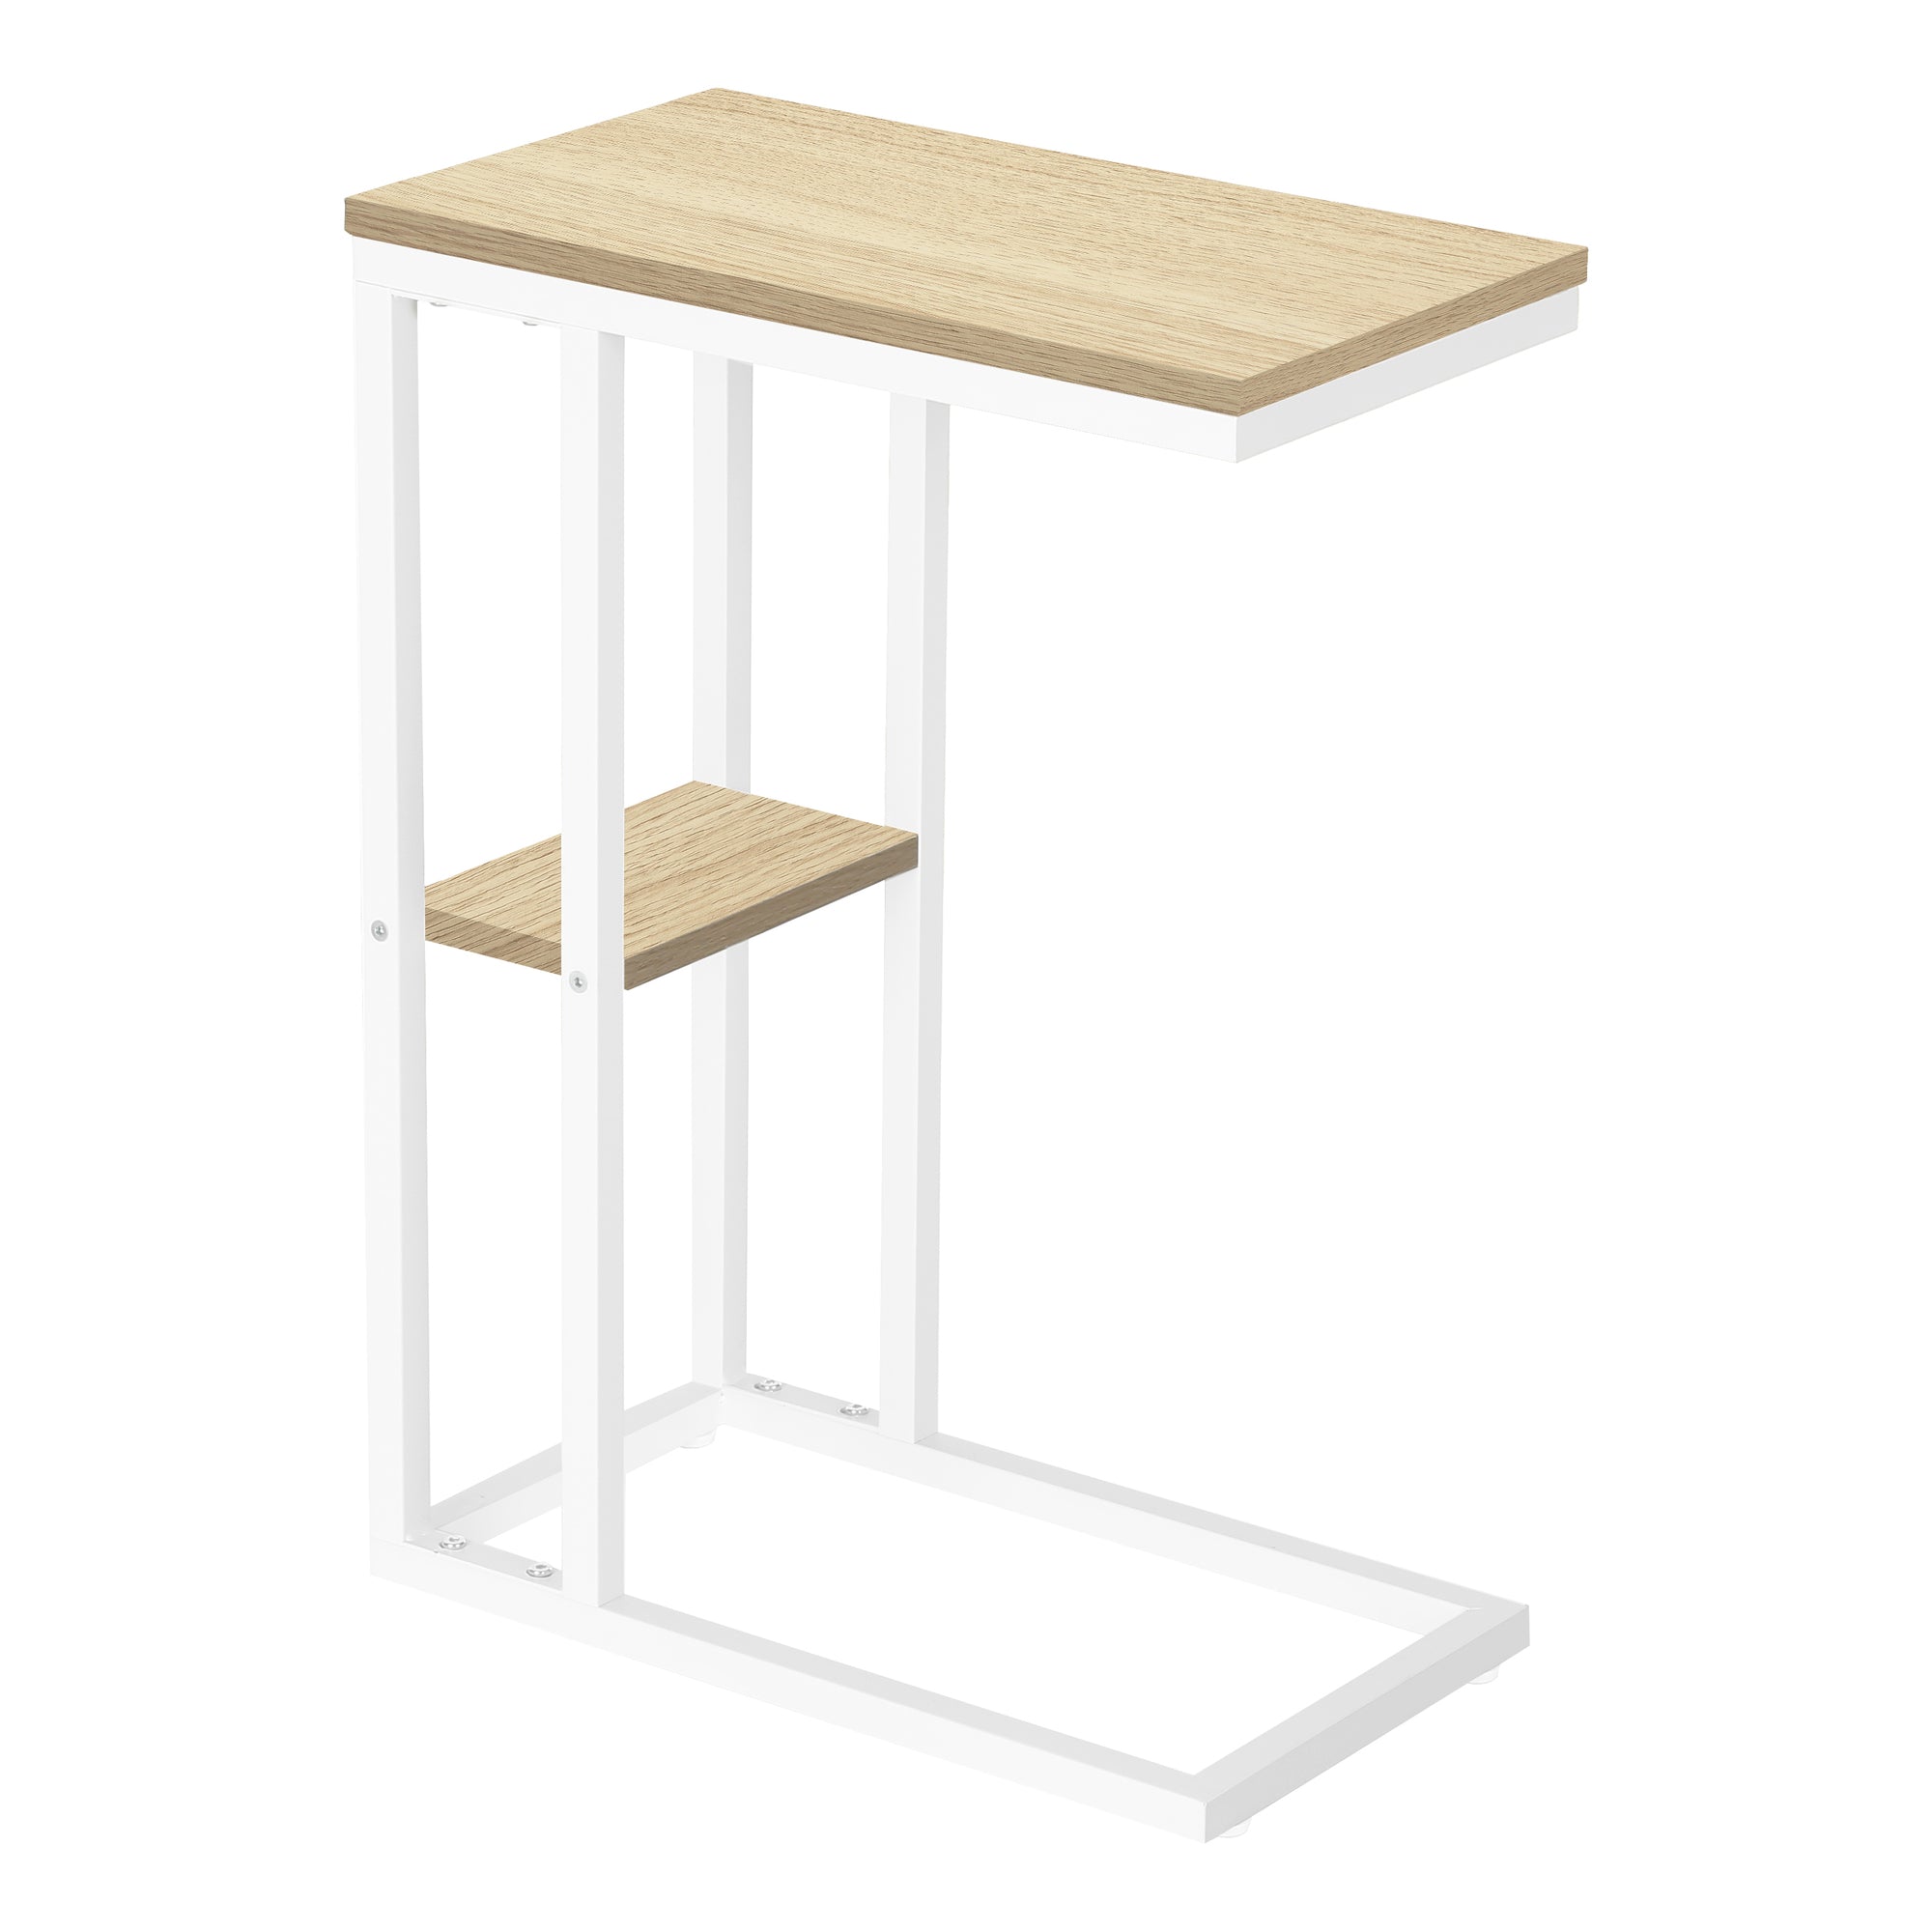 MN-233677    Accent Table, C-Shaped, End, Side, Snack, Living Room, Bedroom, Metal Legs, Laminate, Natural, White, Contemporary, Modern